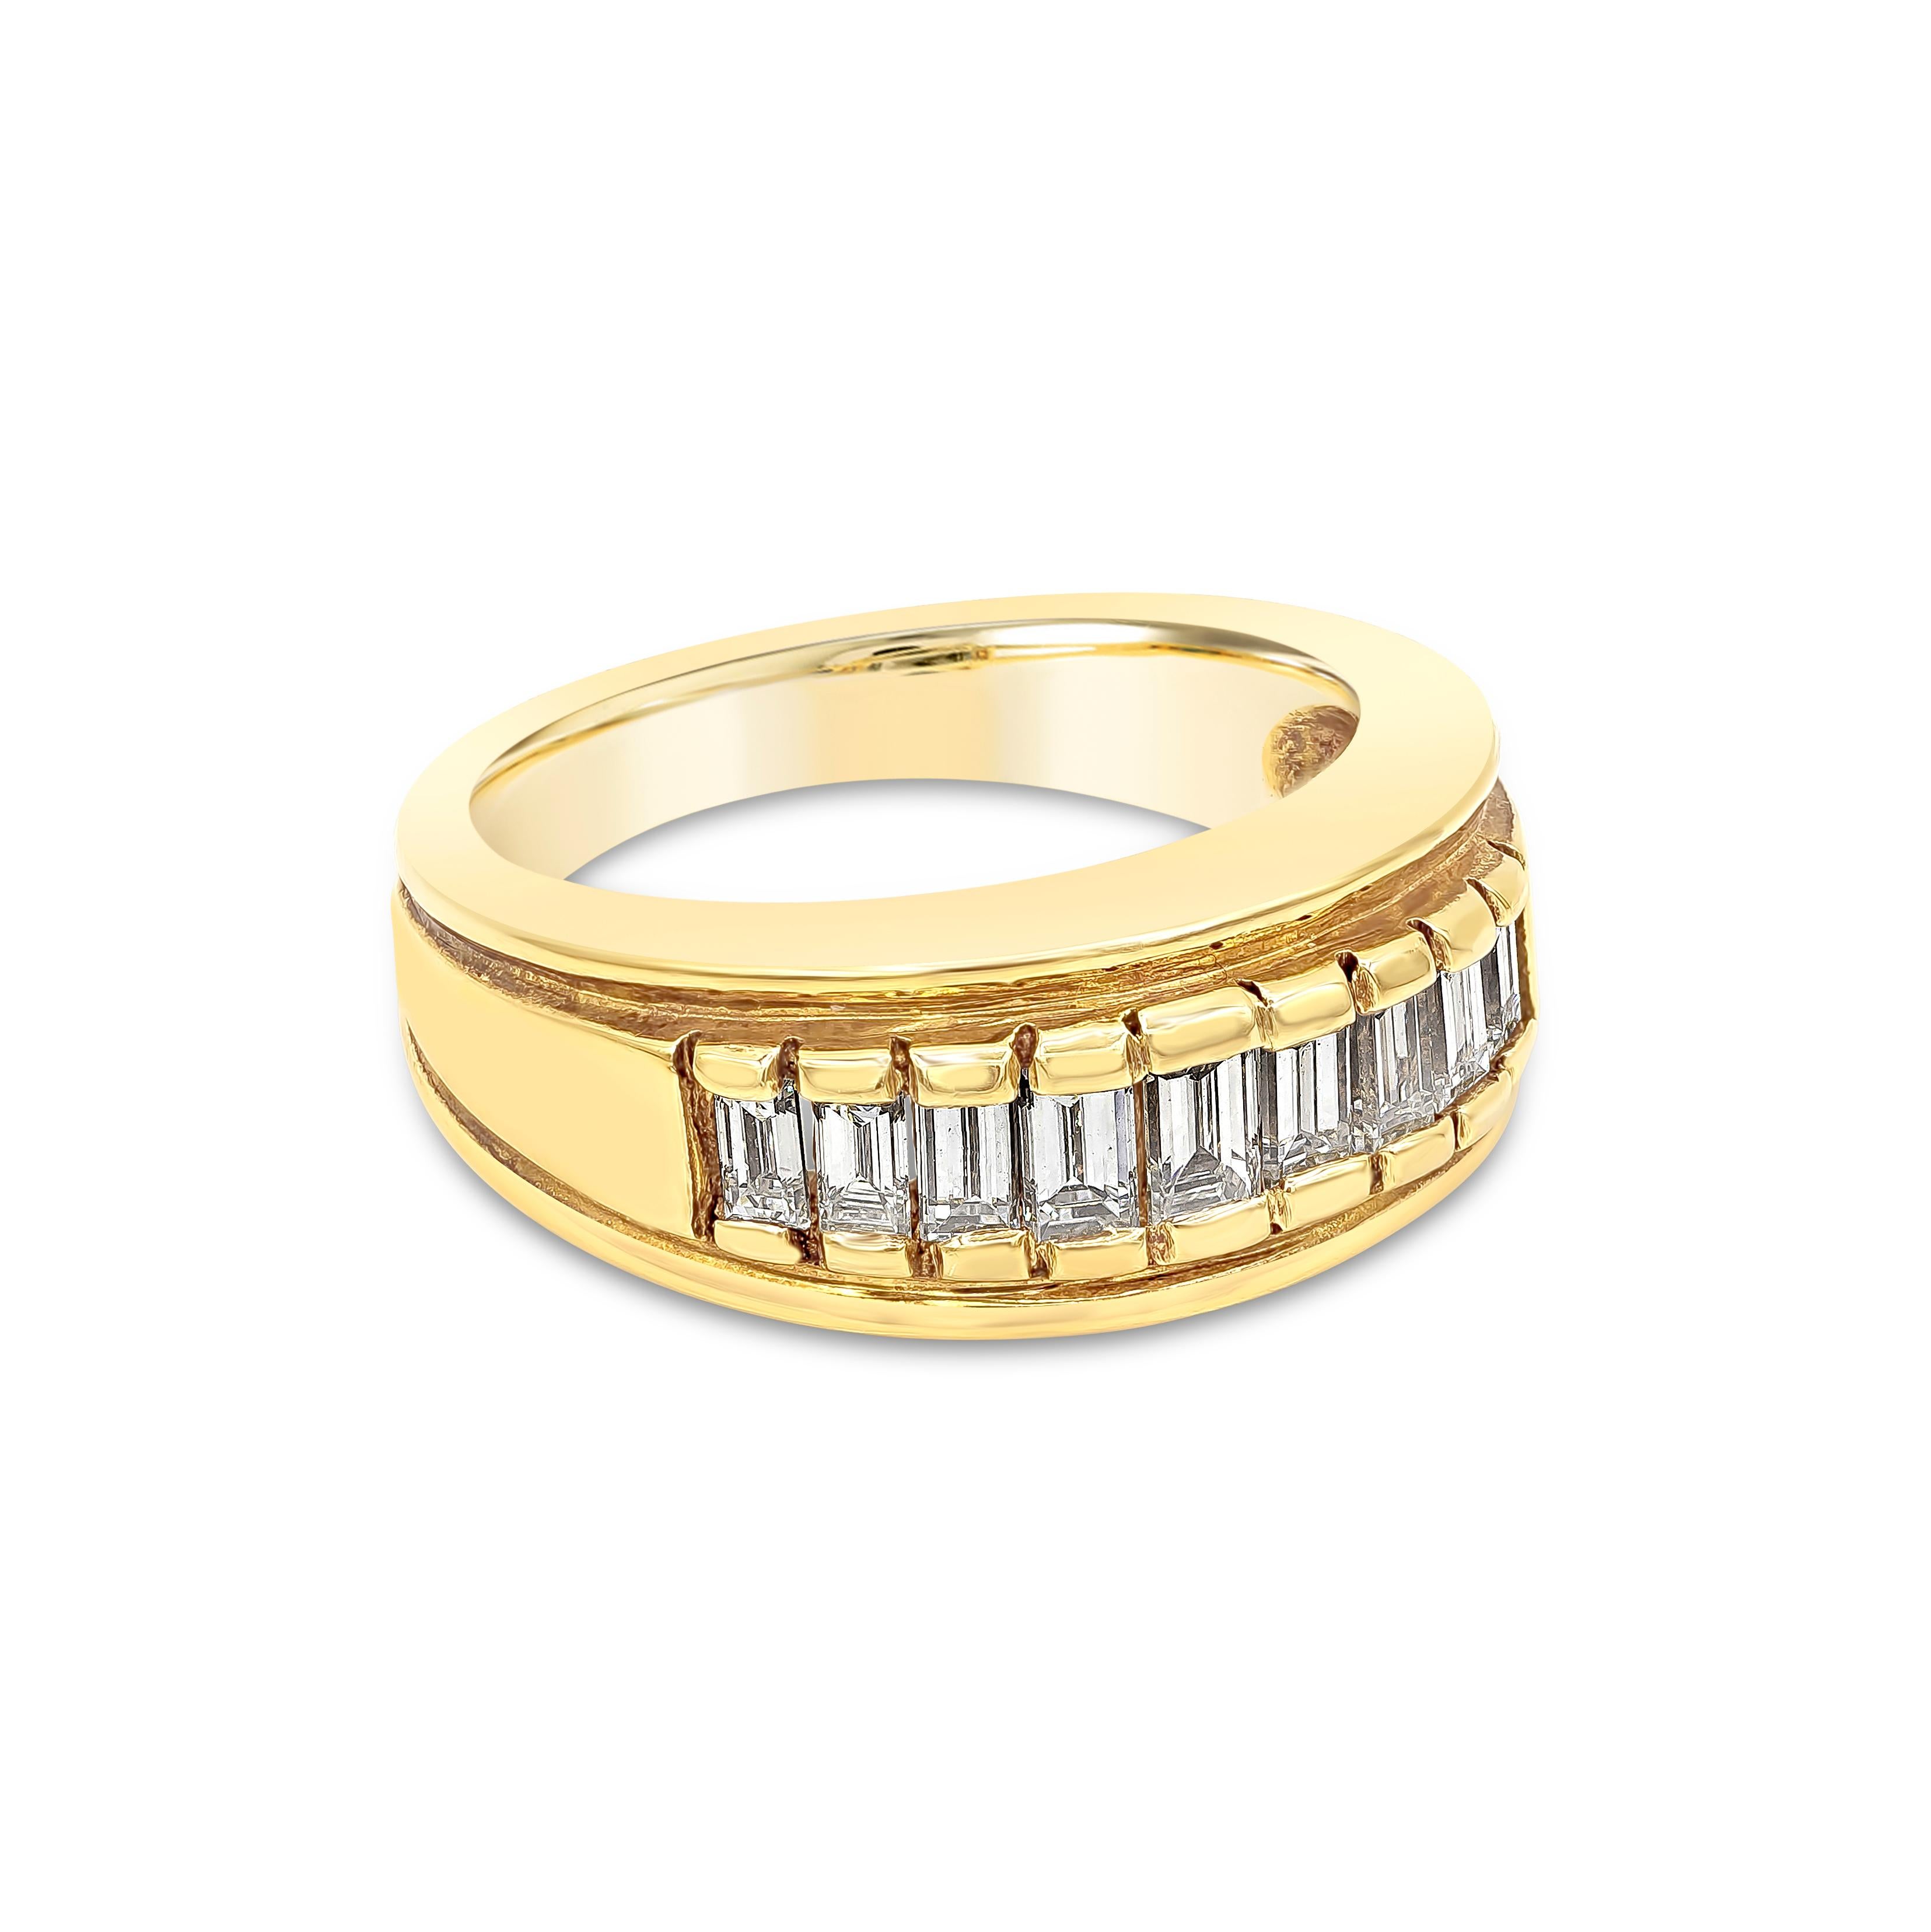 This ring showcases 1.02 carats total of baguette cut diamonds. Diamonds mounted in a unique setting made in 18K Yellow Gold. Size 7 US and resizable. 

Roman Malakov is a custom house, specializing in creating anything you can imagine. If you would